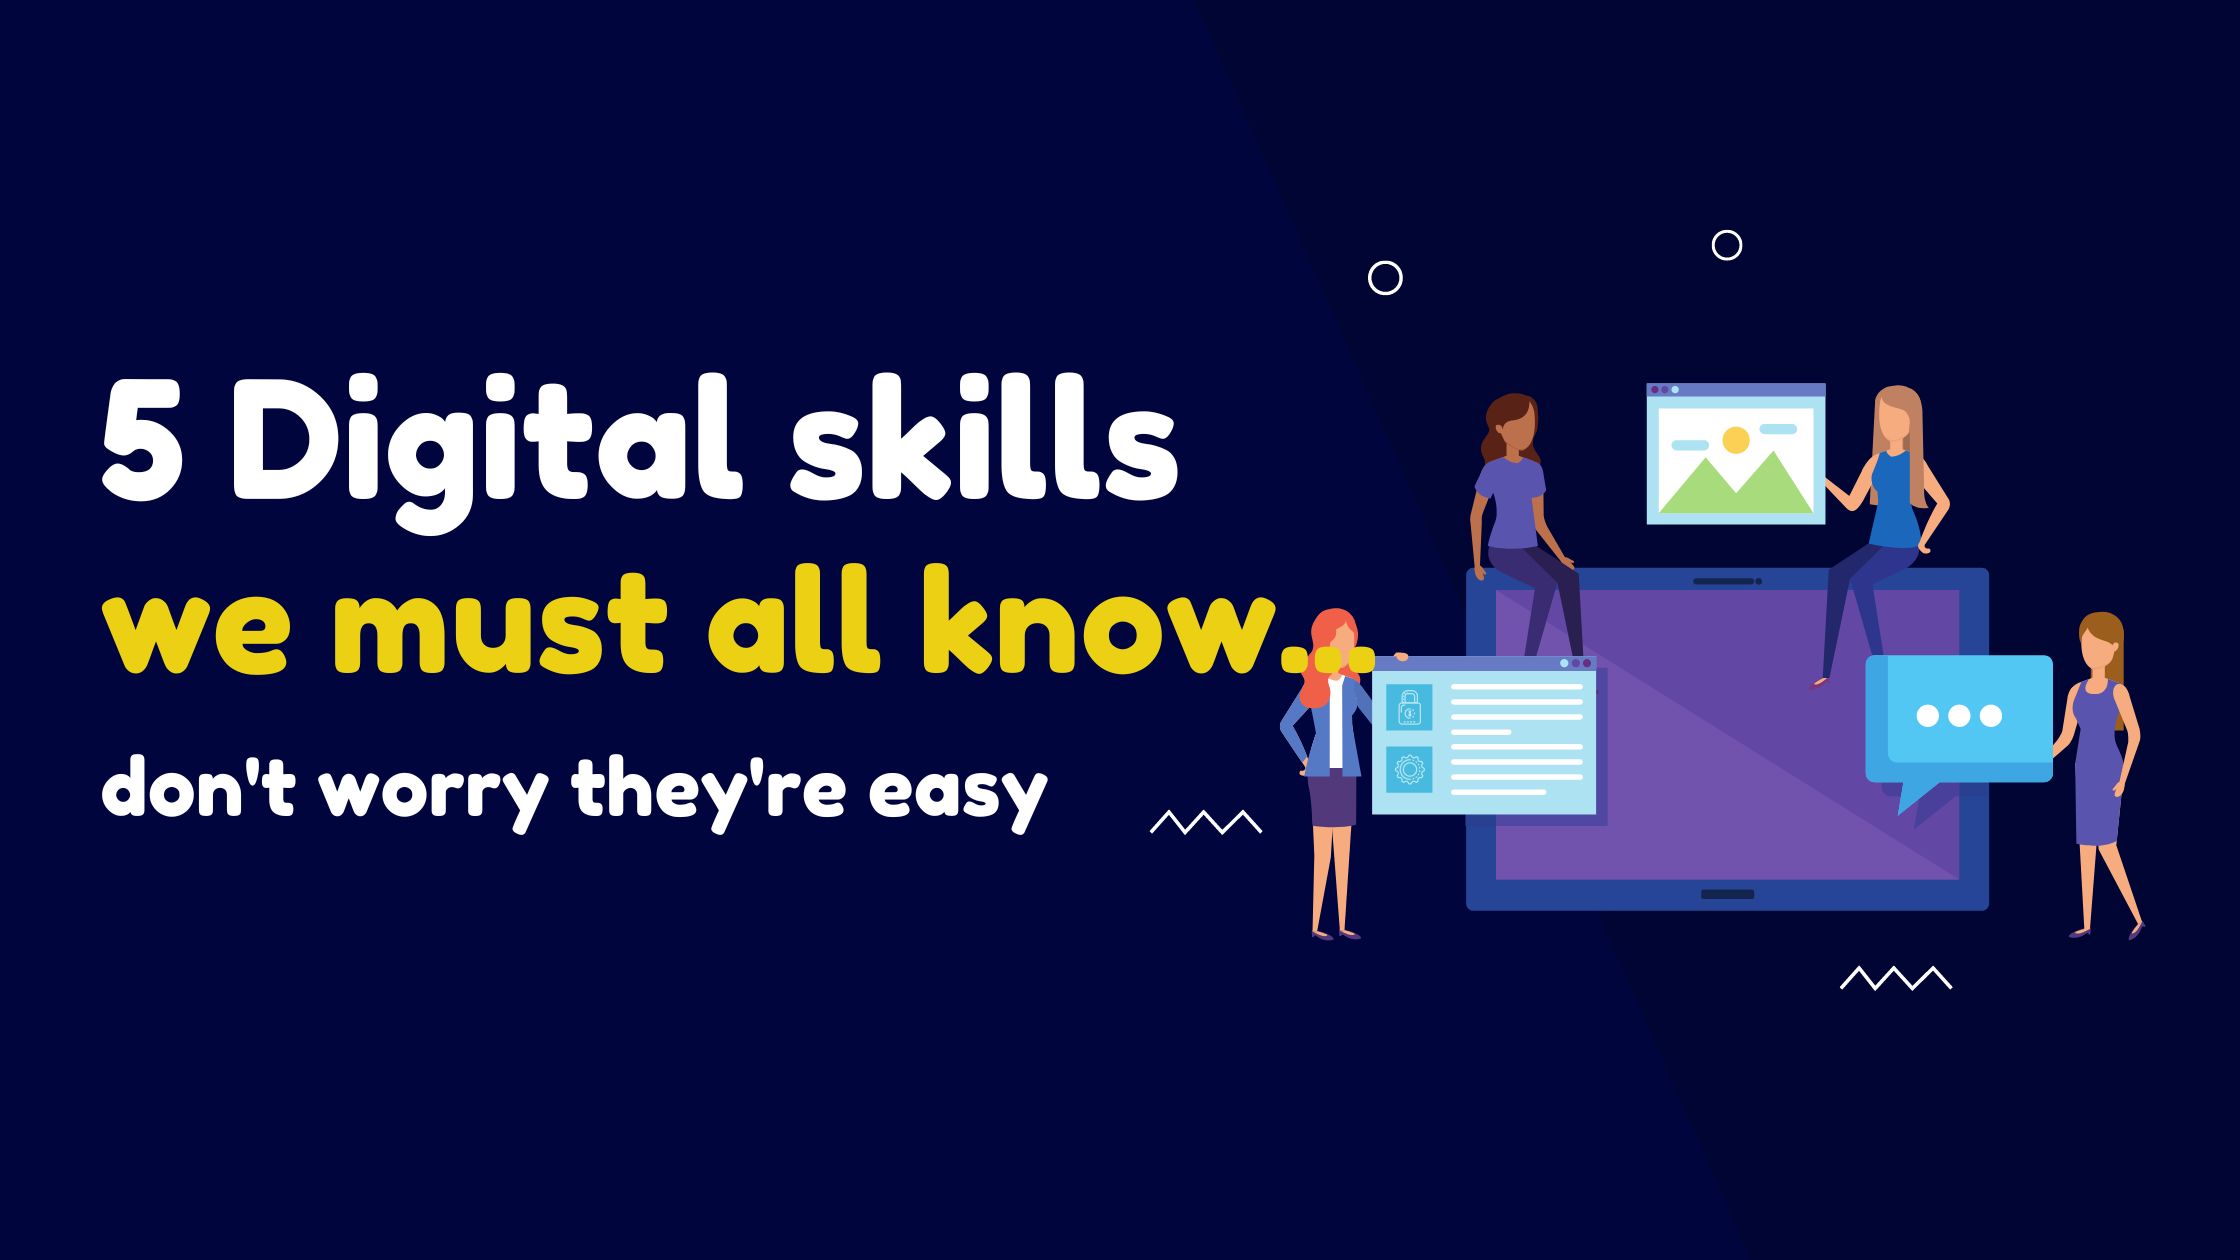 5 digital skills we must all know…don’t worry they’re easy!